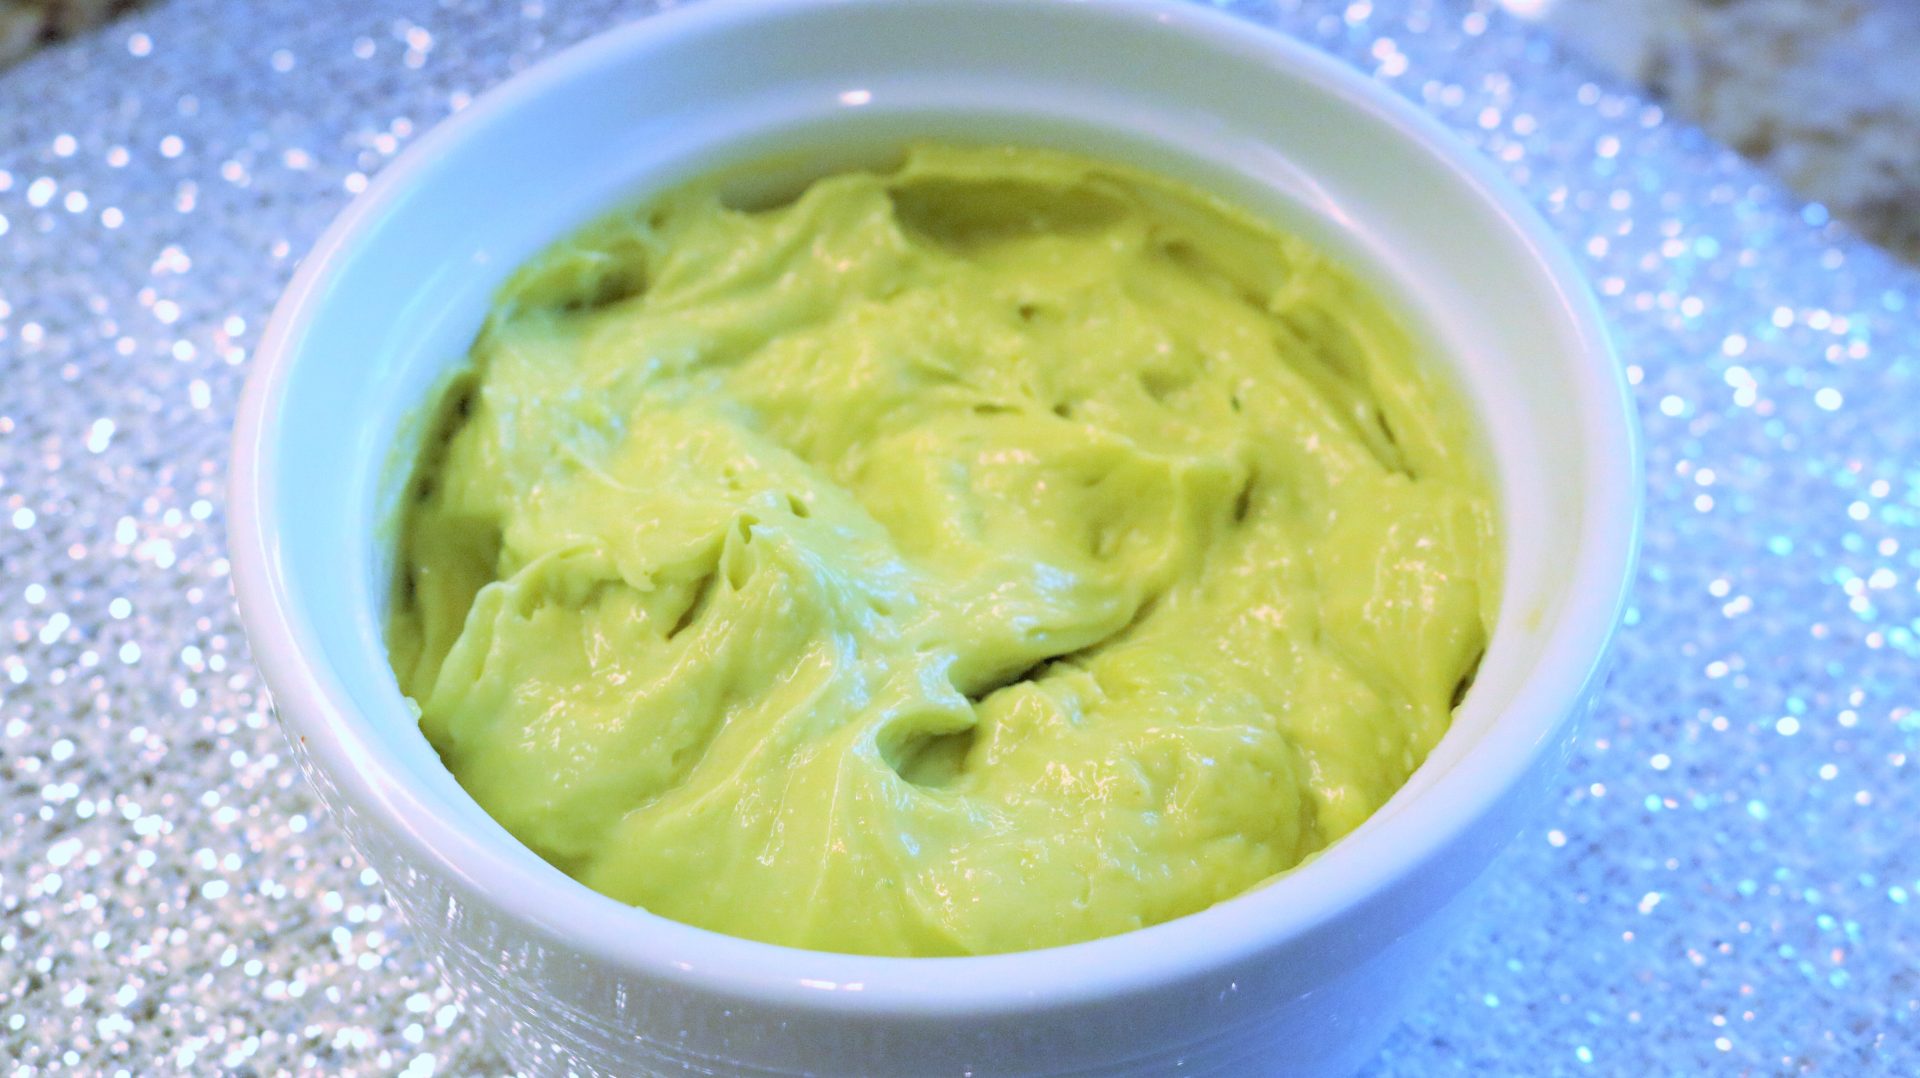 A bowl of guacamole is shown in this picture.